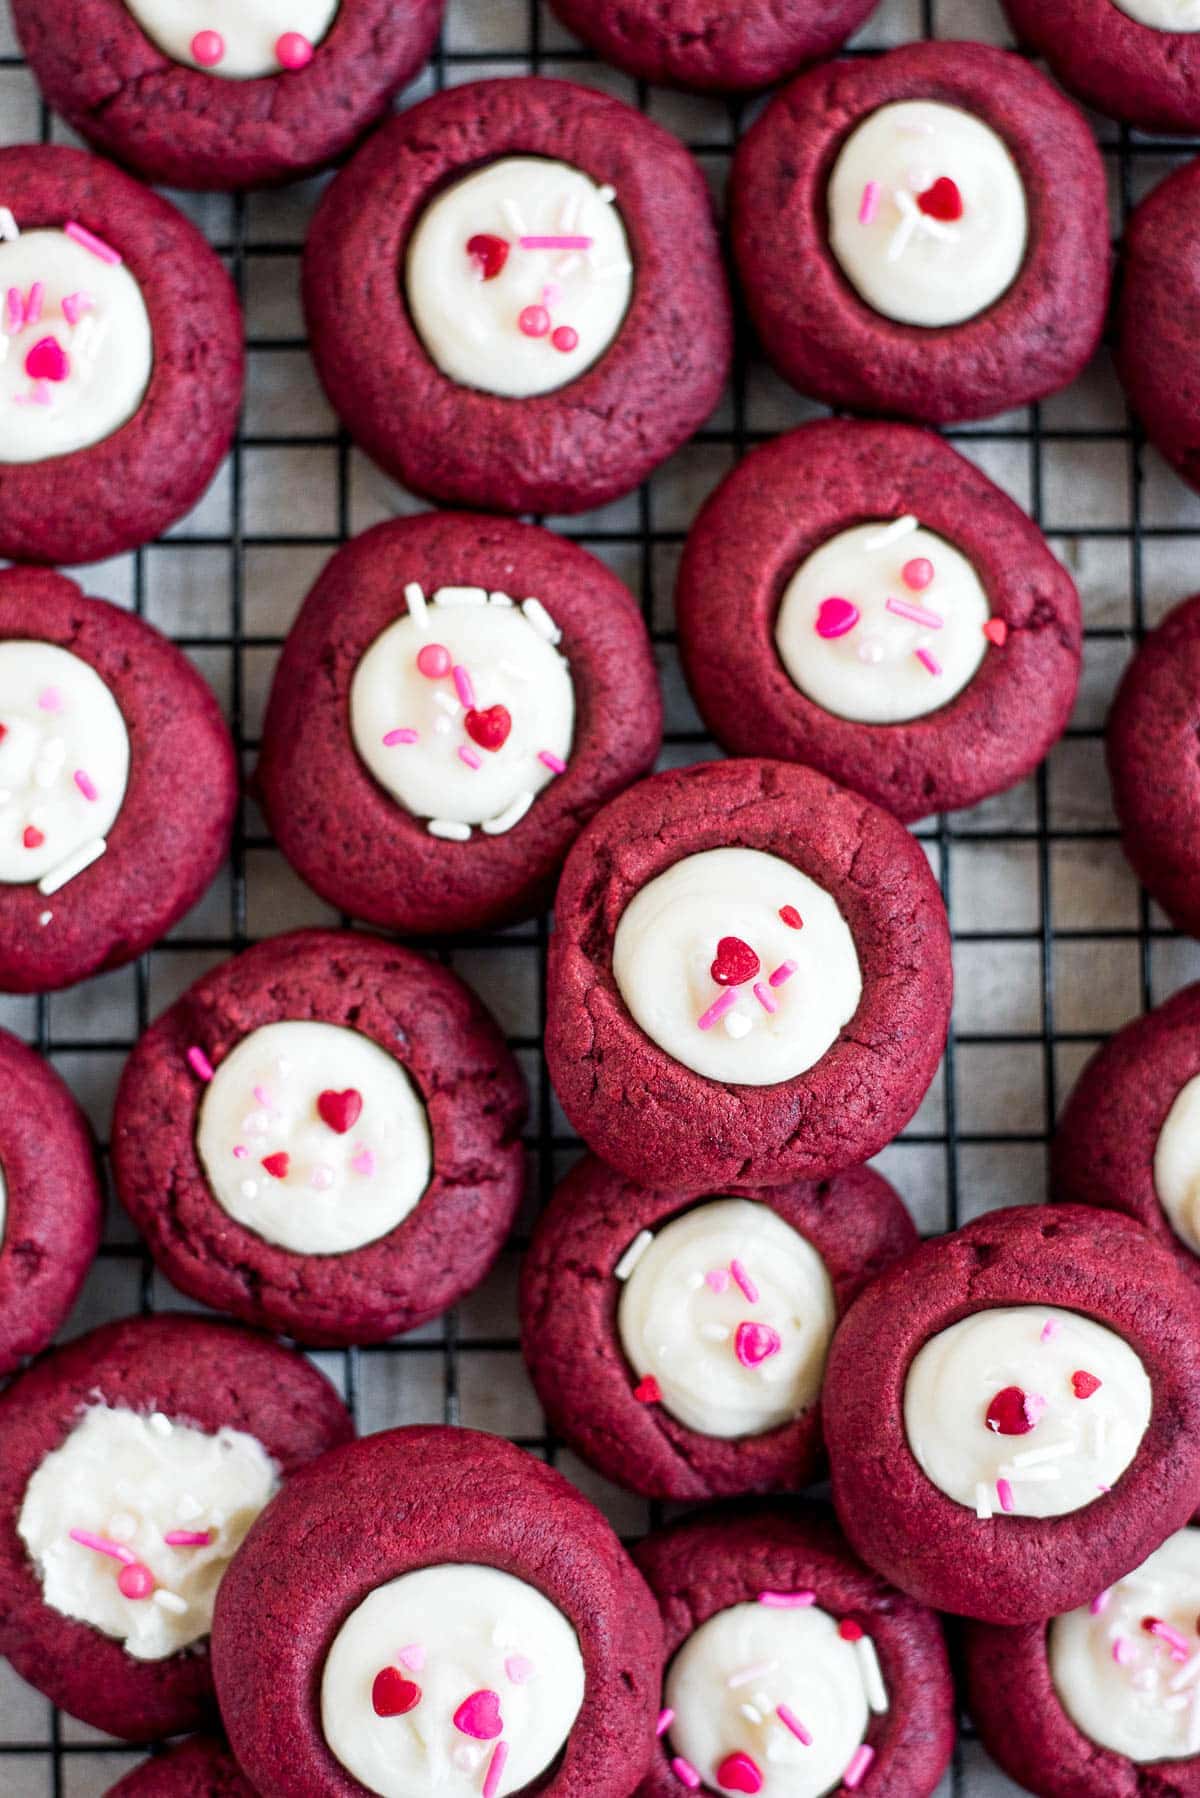 thumbprint cookies scattered on wire rack